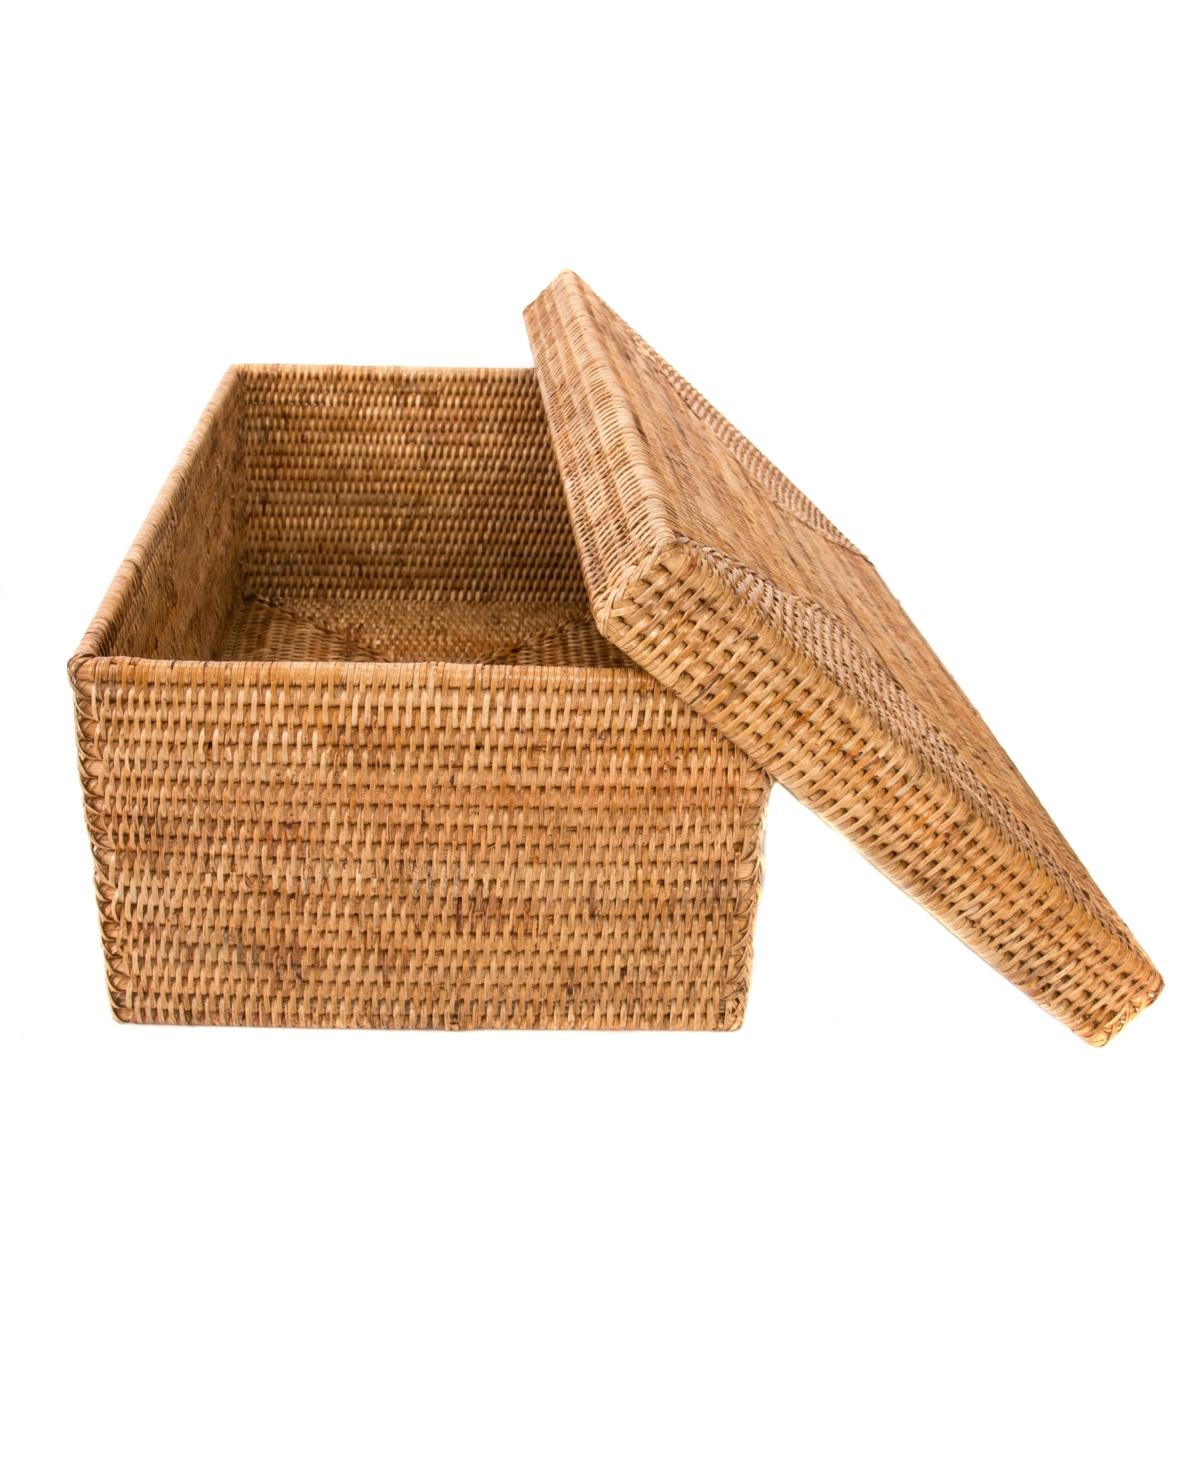 Shop Artifacts Trading Company Artifacts Rattan Rectangular Storage Box With Lid In Honey Brown